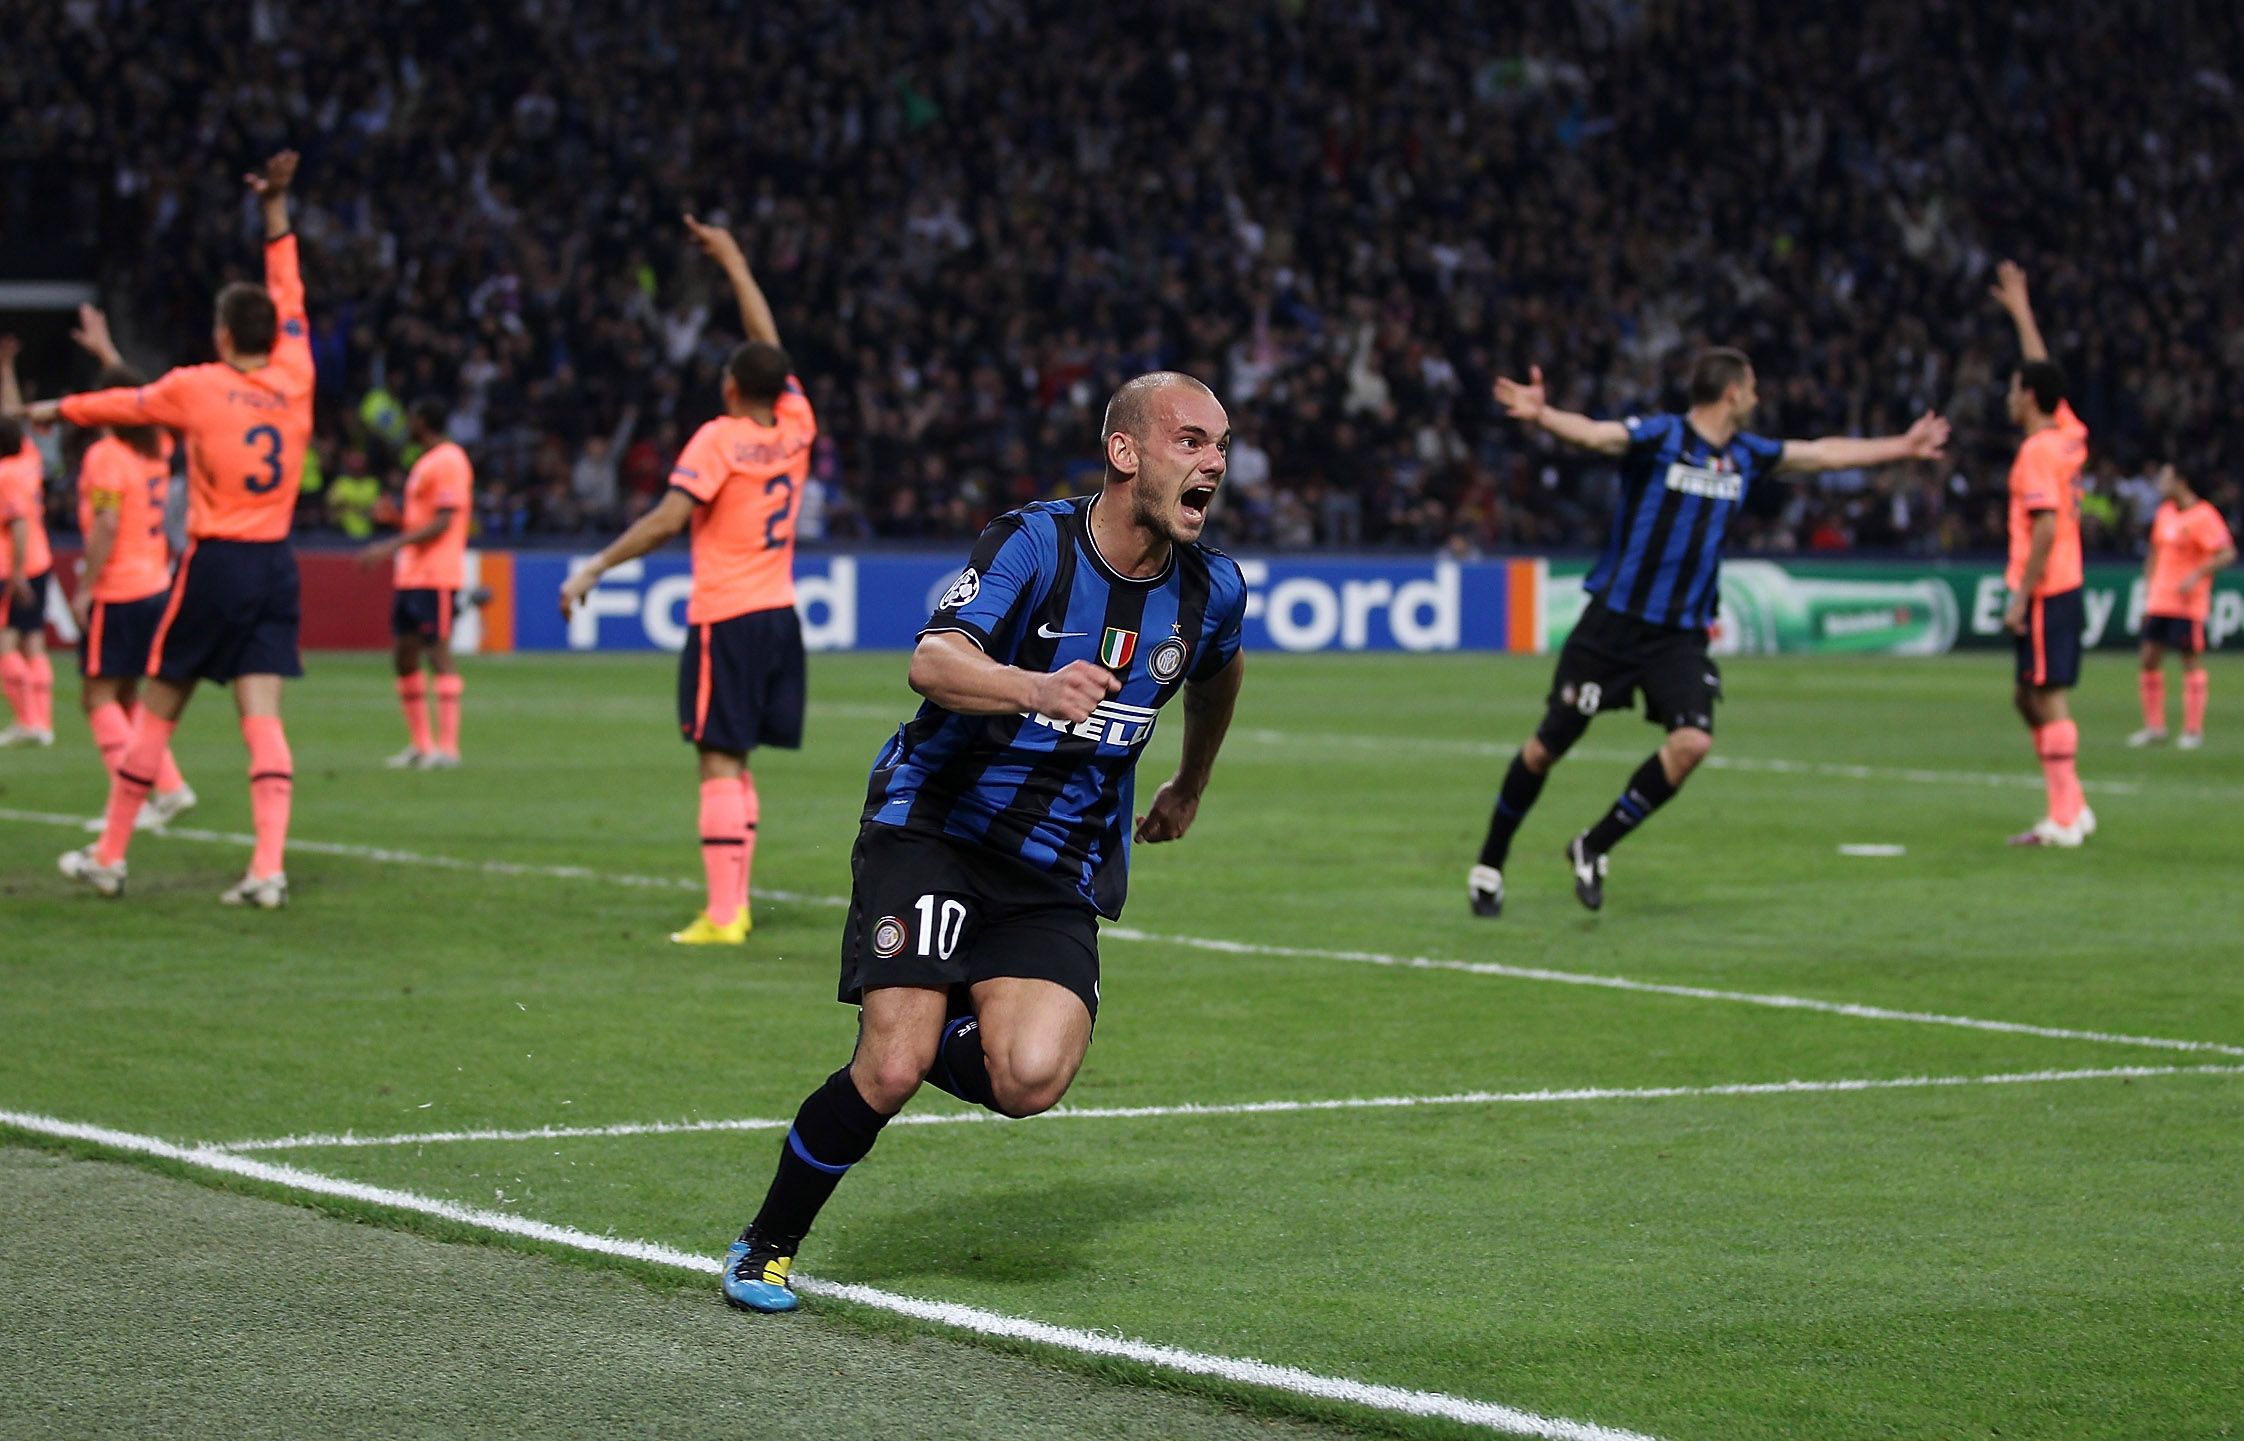 Sneijder reached world class levels with Inter